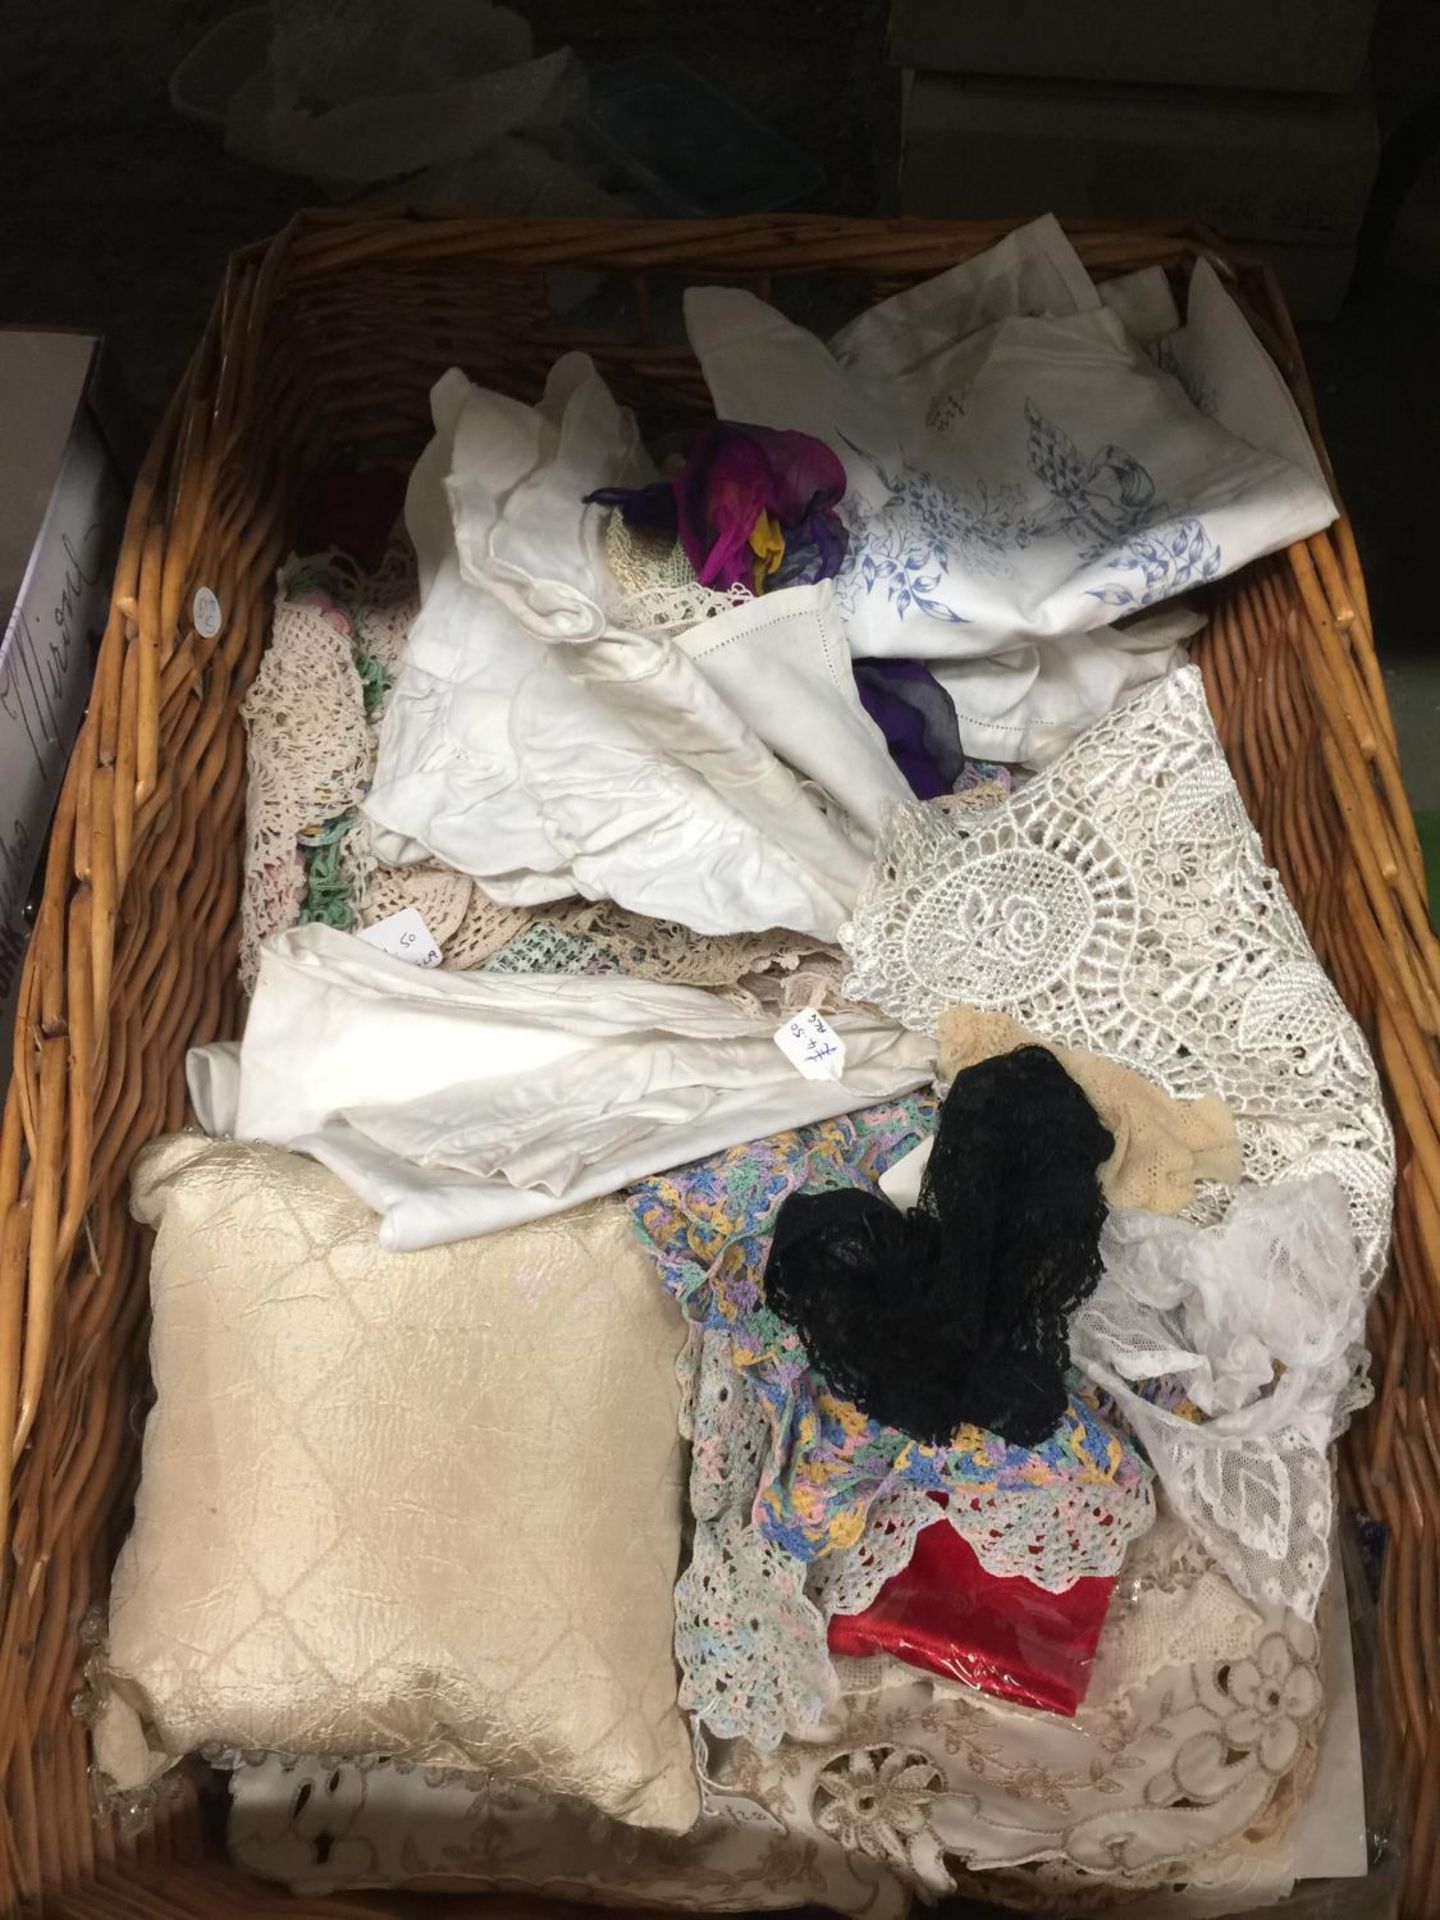 A QUANTITY OF VINTAGE DOILIES, PLACEMATS, ETC IN A WICKER BASKET